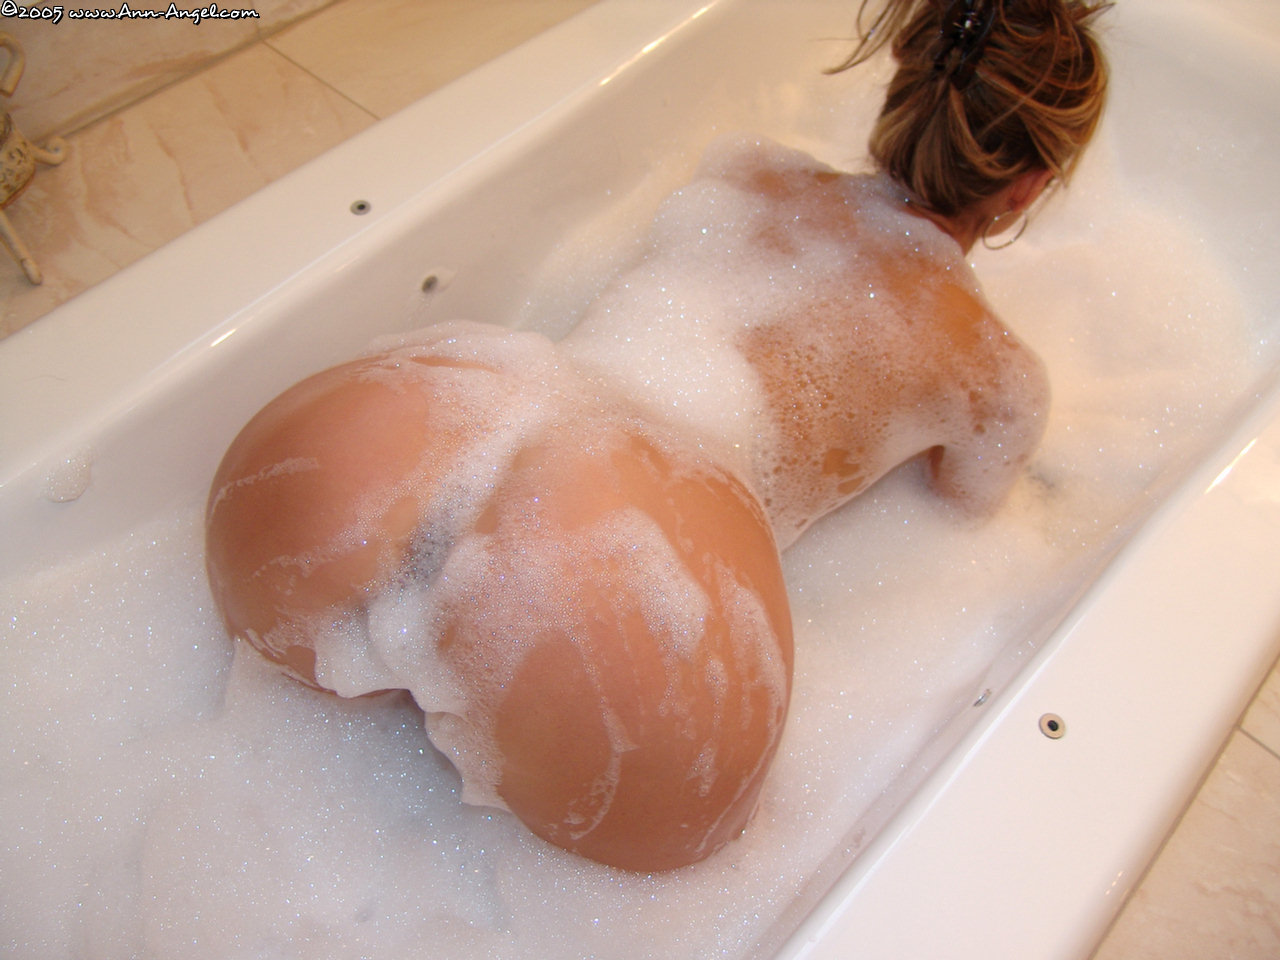 ann-angel-bubble-bath-naked-young-girl-11